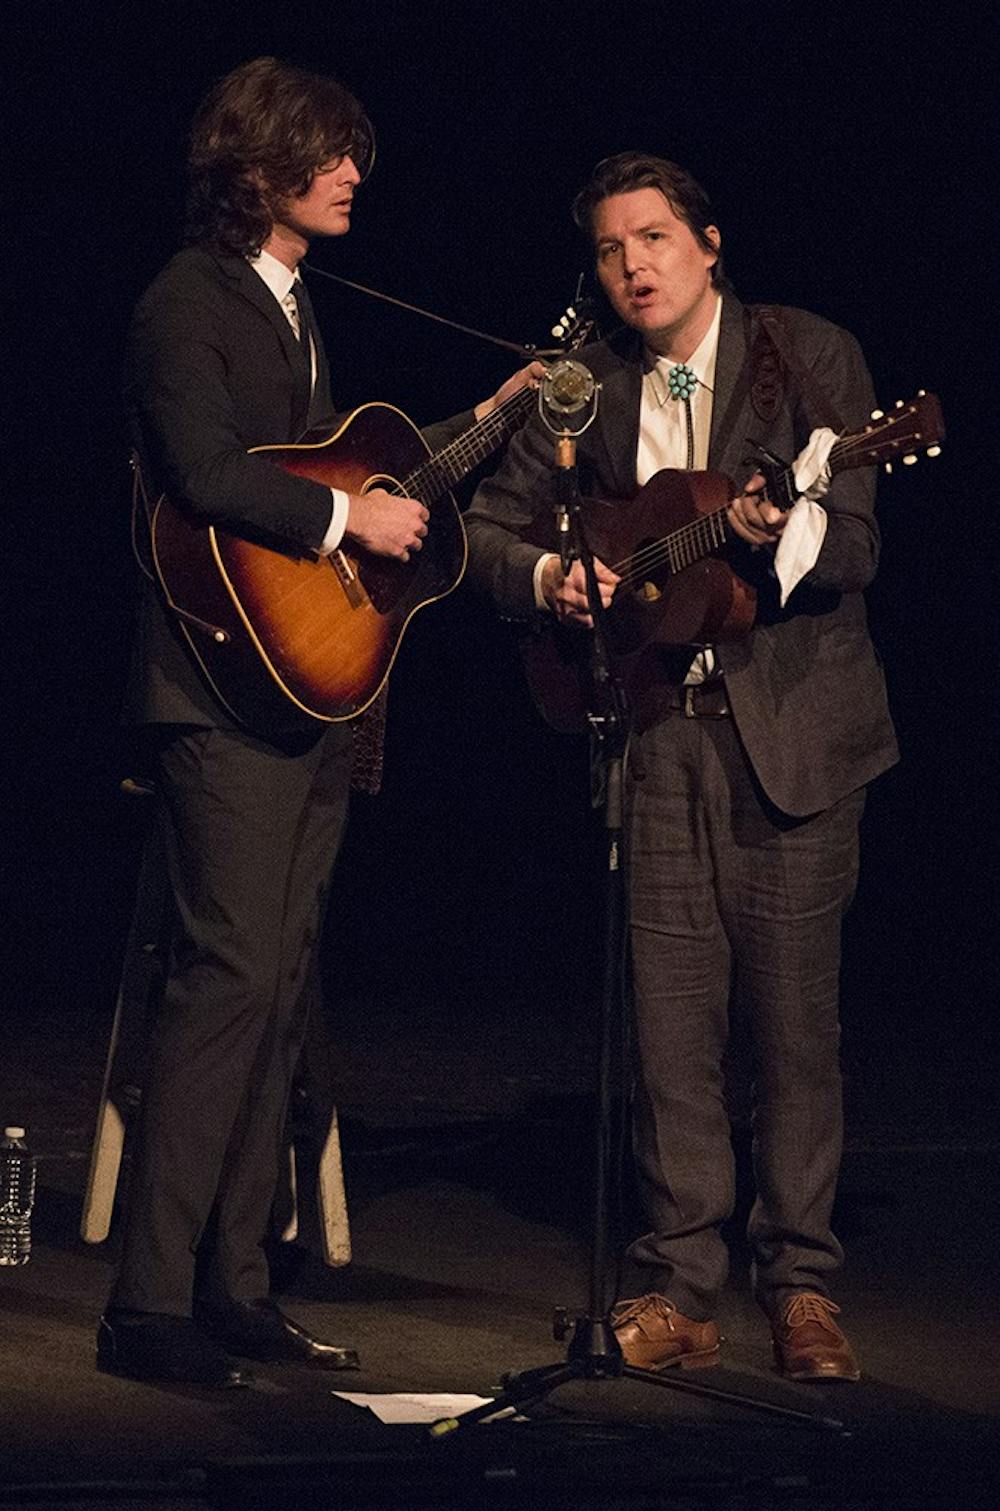 The Milk Carton Kids wowed the crowd with their onstage energy at the Jefferson.